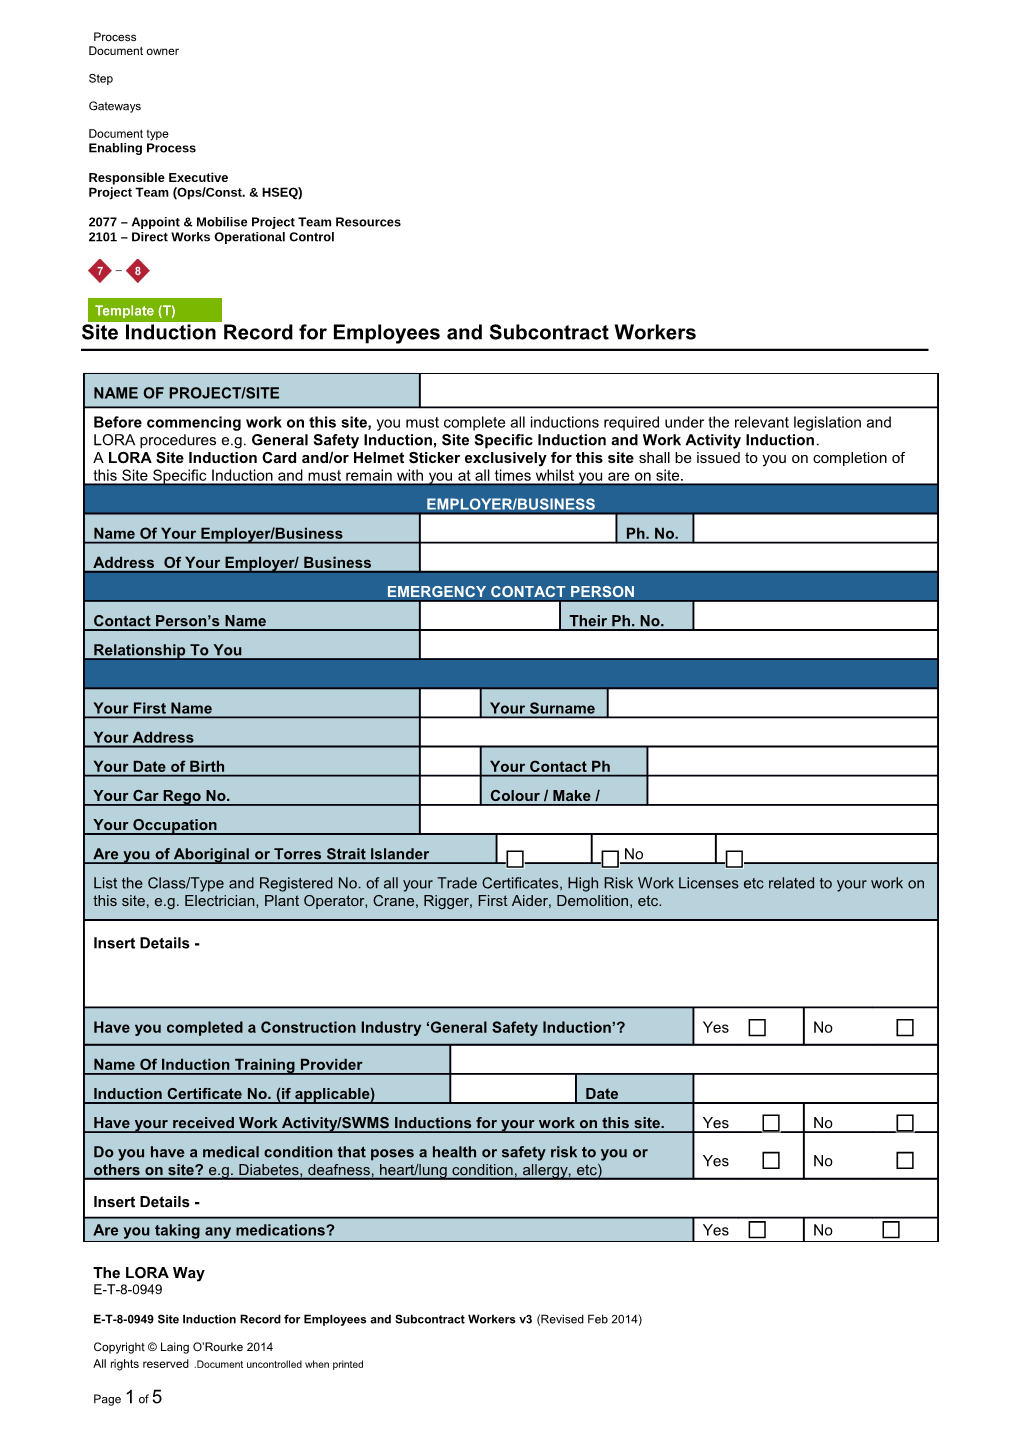 E-T-8-0949 Site Induction Record for Employees and Subcontract Workers